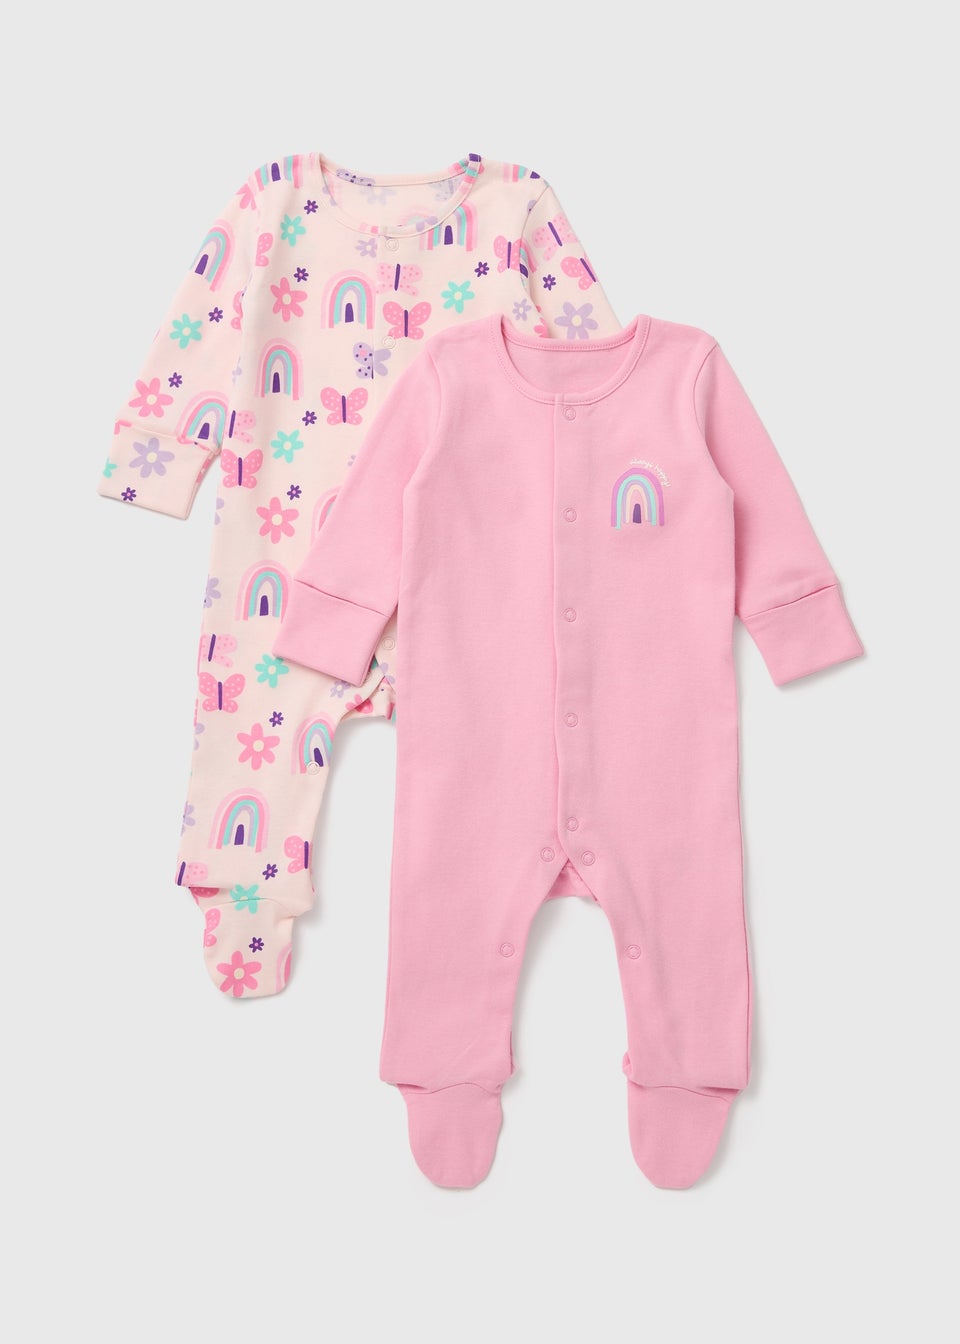 Baby 2 Pack Pink Butterfly Sleepsuit (Newborn-23mths)